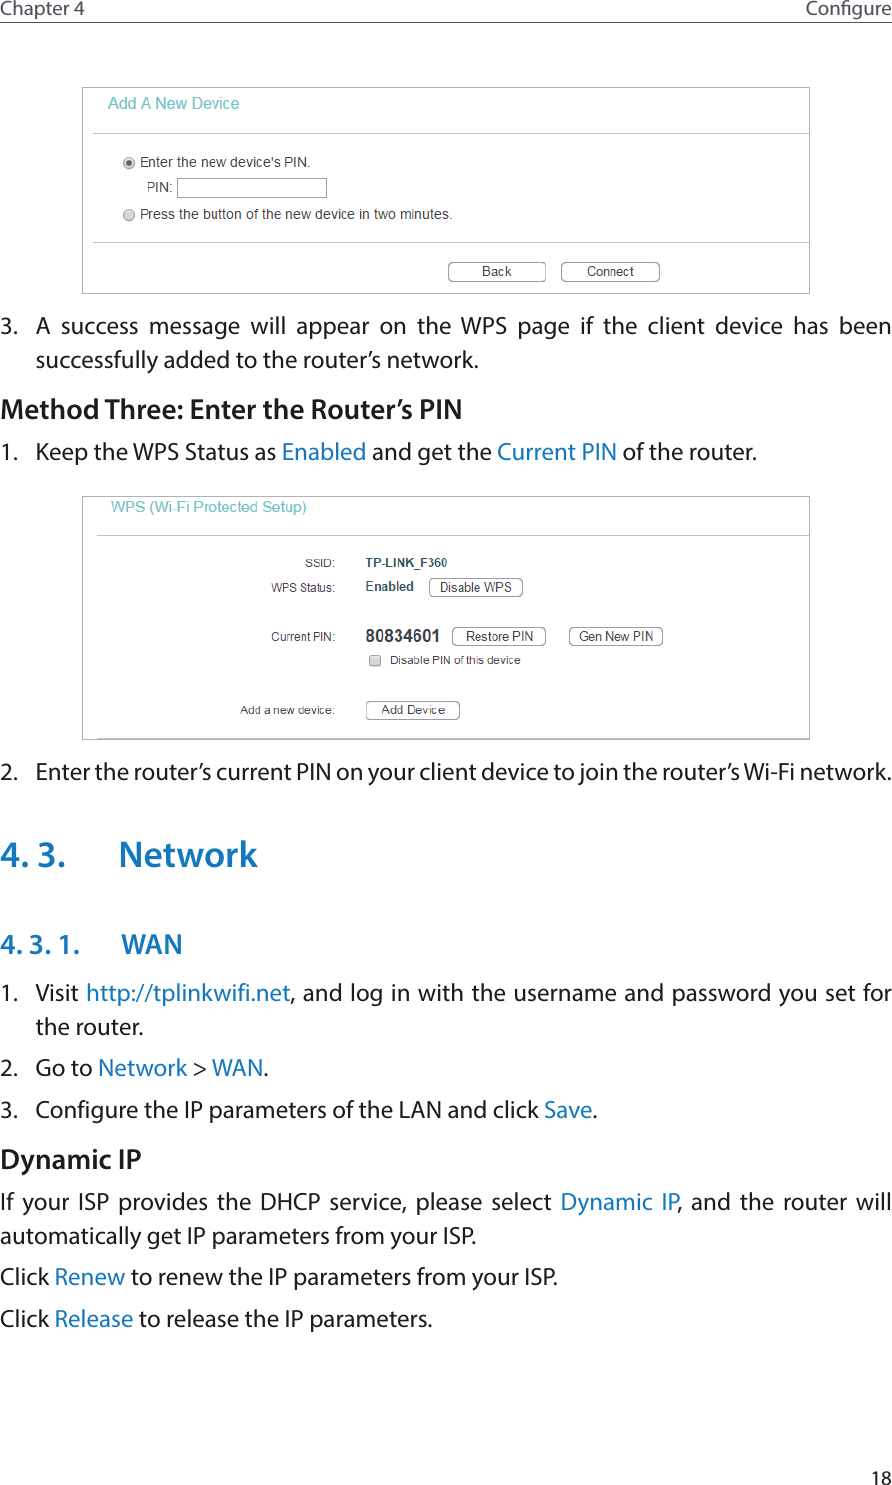 18Chapter 4 Congure3.  A success message will appear on the WPS page if the client device has been successfully added to the router’s network.Method Three: Enter the Router’s PIN1.  Keep the WPS Status as Enabled and get the Current PIN of the router.2.  Enter the router’s current PIN on your client device to join the router’s Wi-Fi network.4. 3.  Network4. 3. 1.  WAN1.  Visit http://tplinkwifi.net, and log in with the username and password you set for the router.2.  Go to Network &gt; WAN.3.  Configure the IP parameters of the LAN and click Save.Dynamic IPIf your ISP provides the DHCP service, please select Dynamic IP, and the router will automatically get IP parameters from your ISP.Click Renew to renew the IP parameters from your ISP. Click Release to release the IP parameters.